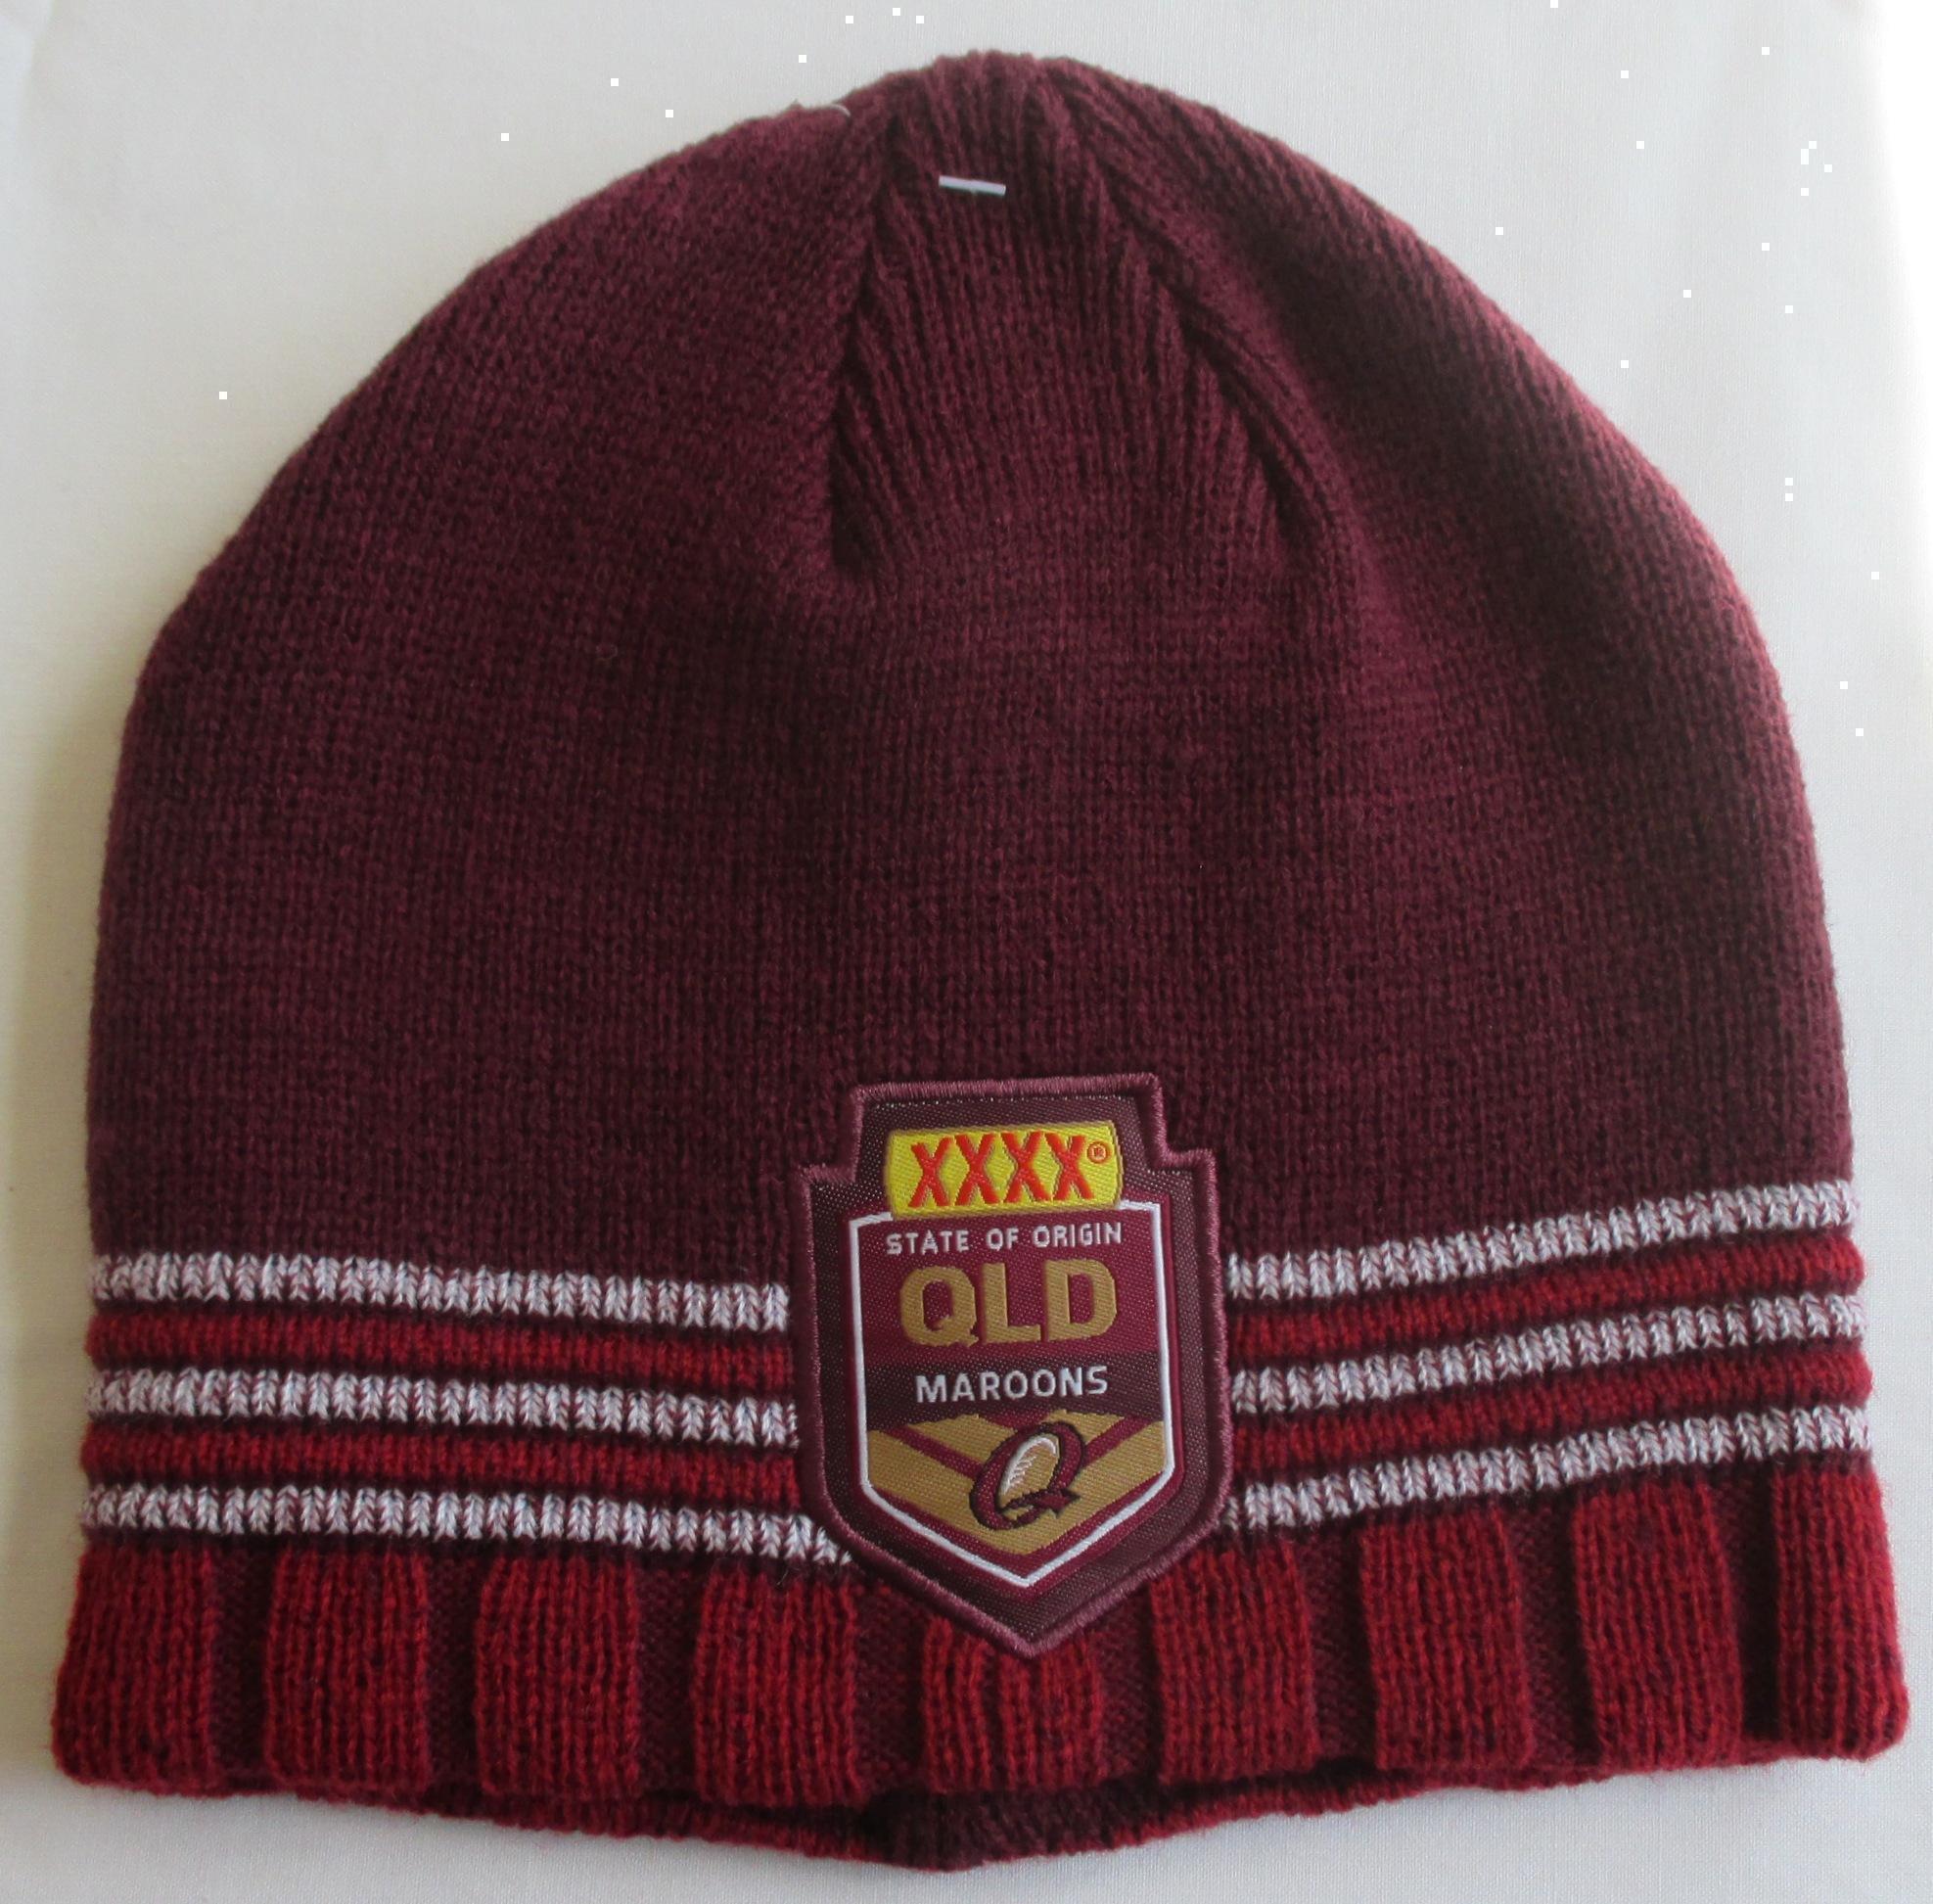 QLD Maroons Supporter Beanie 